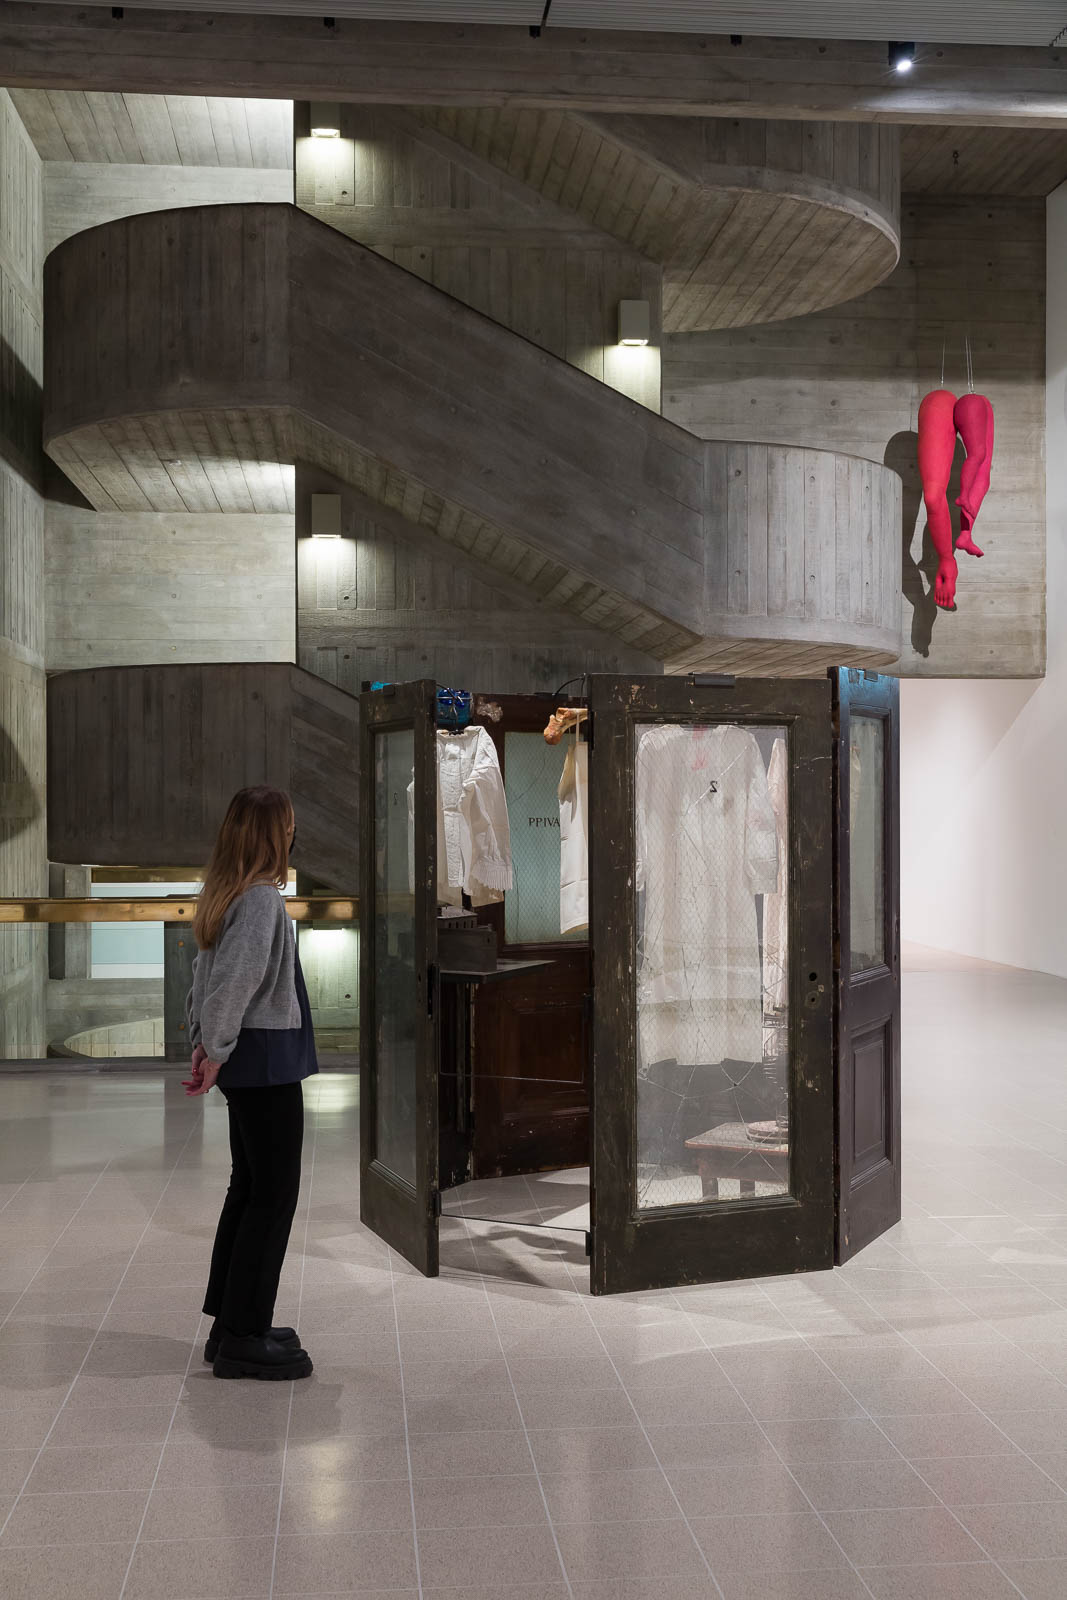 Louise Bourgeois: The Woven Child at the Hayward Gallery, London